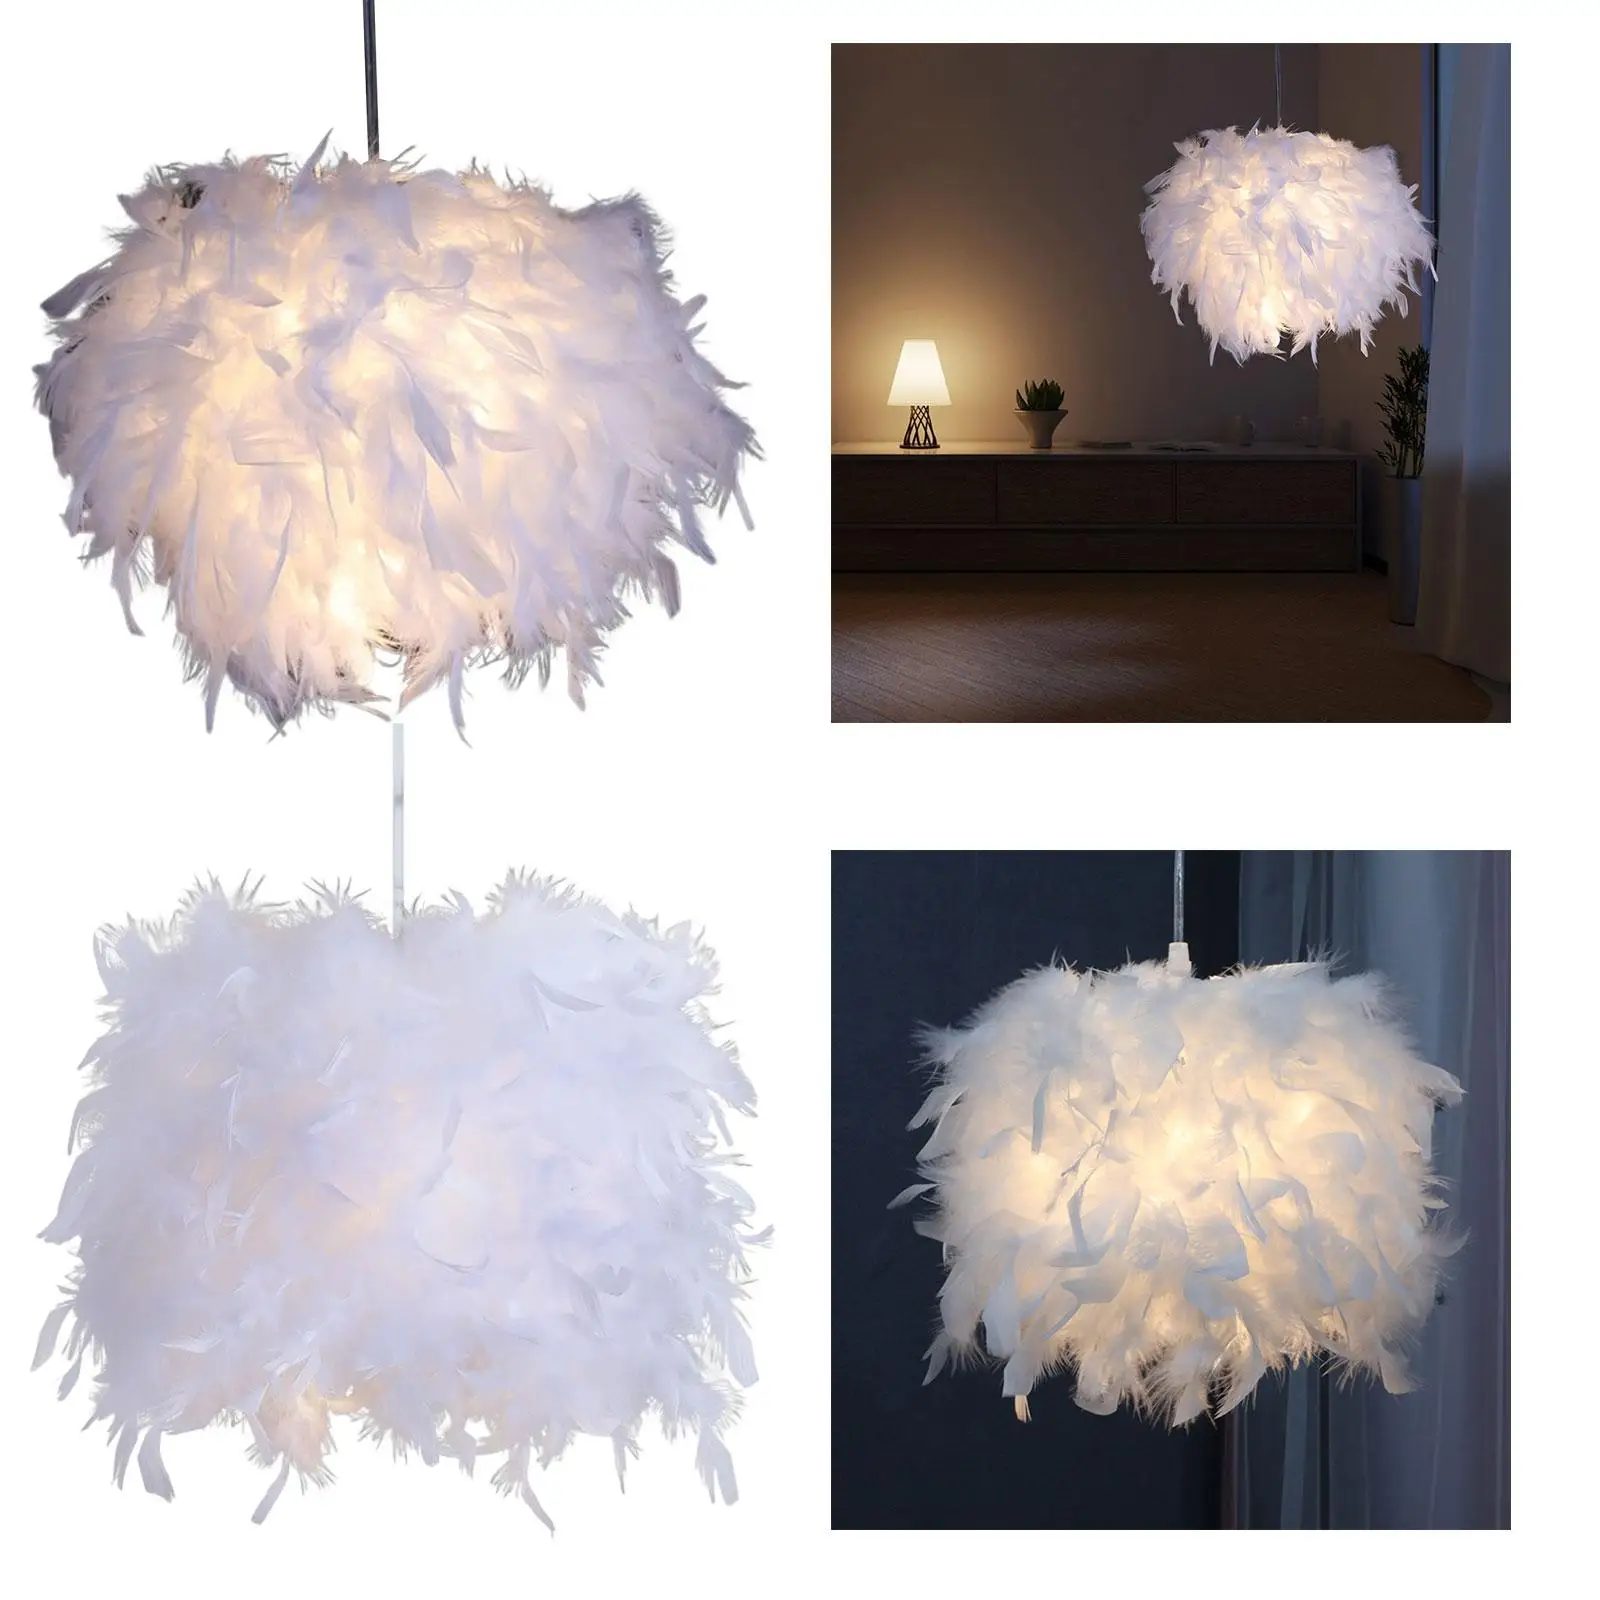 Decorative Feather Lampshade Decor Romantic Accessory Hanging Lampshade for Home Table Lamp Floor Lamp Bedside Lamp Decoration